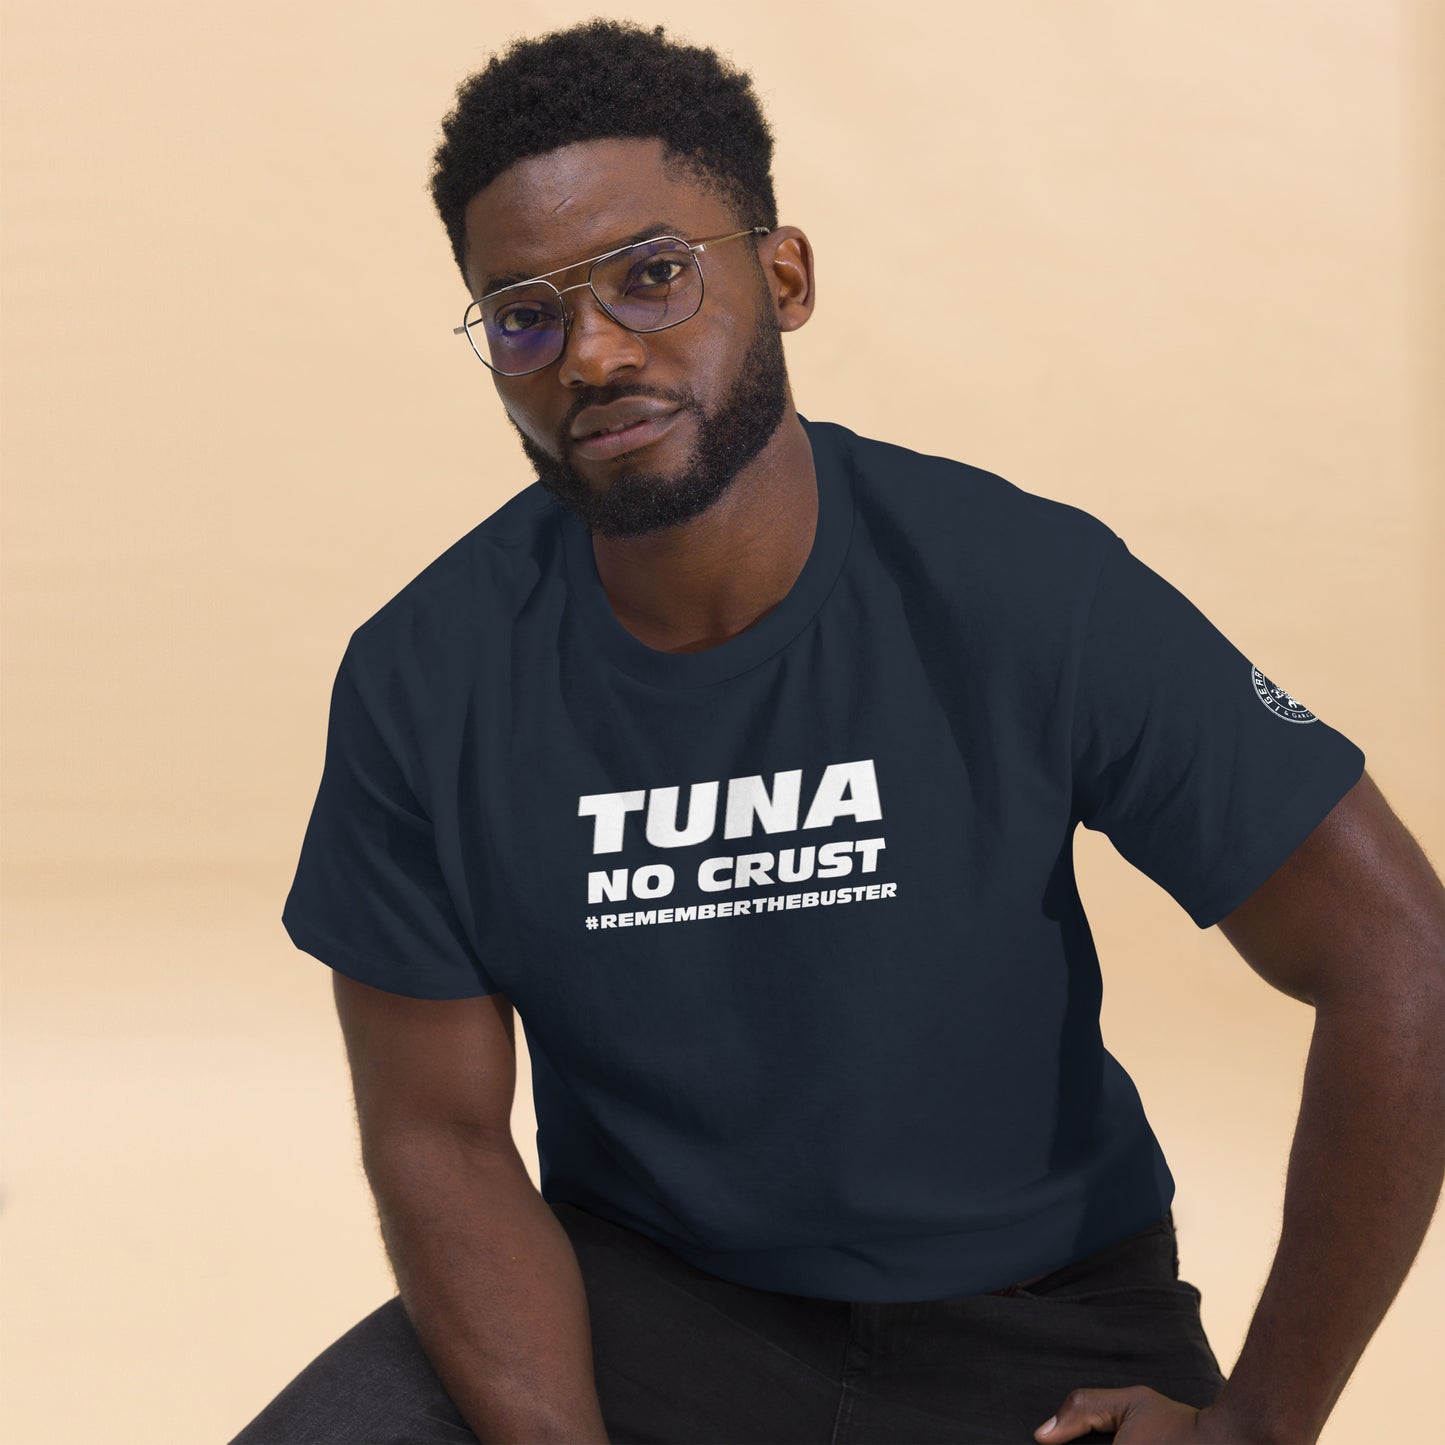 TUNA NO CRUST - Remember the buster - Men's classic tee